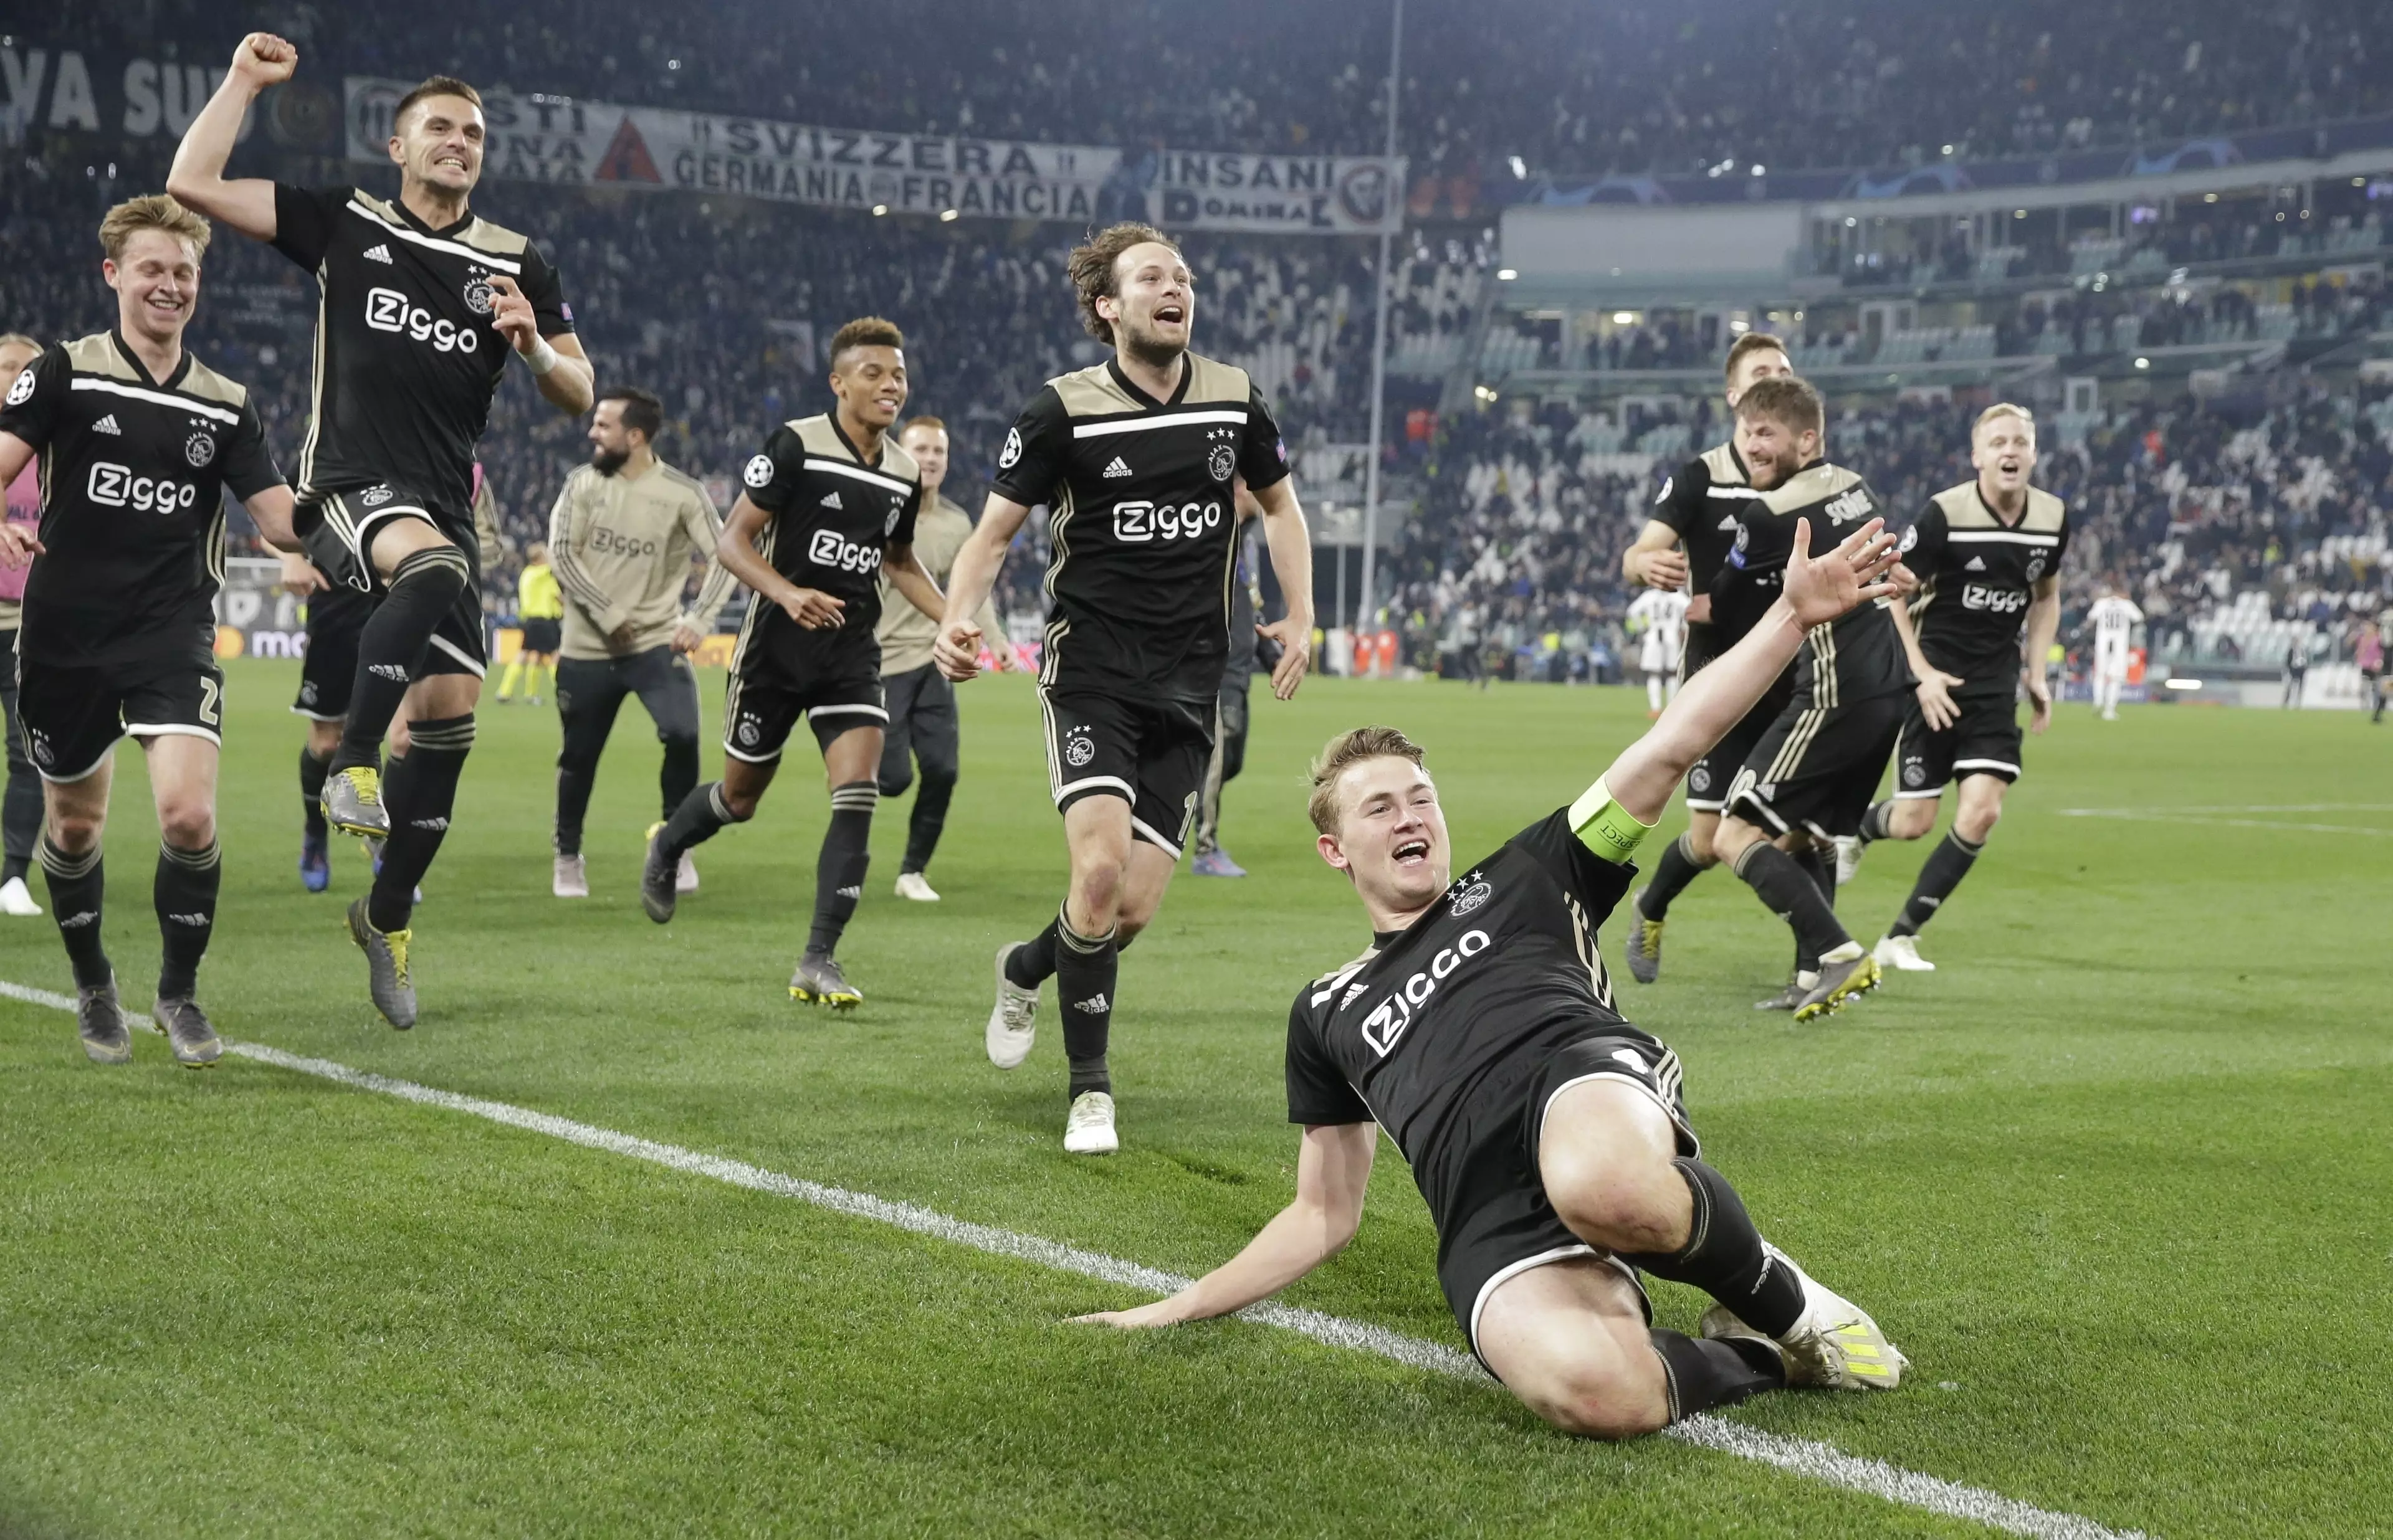 Ajax have beaten Juventus and Real Madrid on the way to the Champions League semi. Image: PA Images